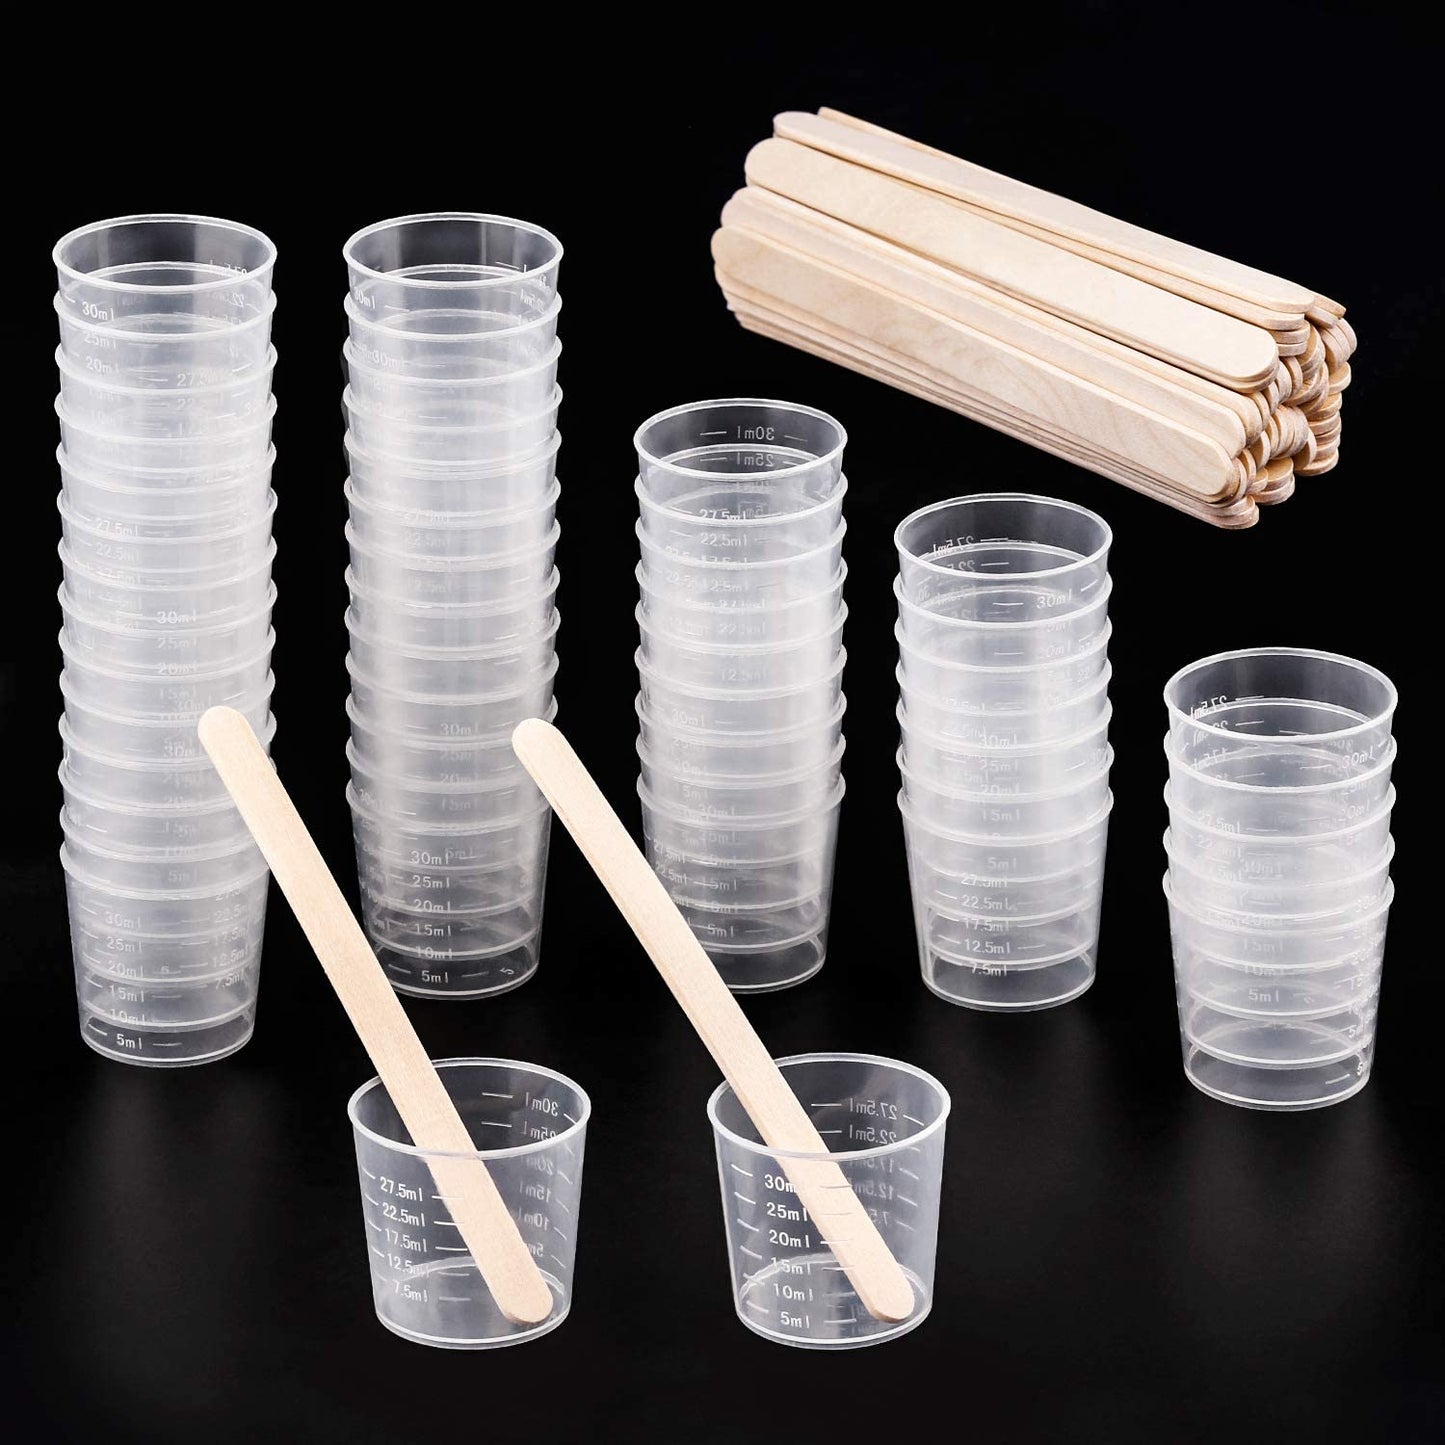 50 Pack 30Ml Plastic Reusable Graduated Cups Transparent Scale Cups with 50 Pack Wooden Stirring Sticks for Mixing Paint, Stain, Epoxy, Resin